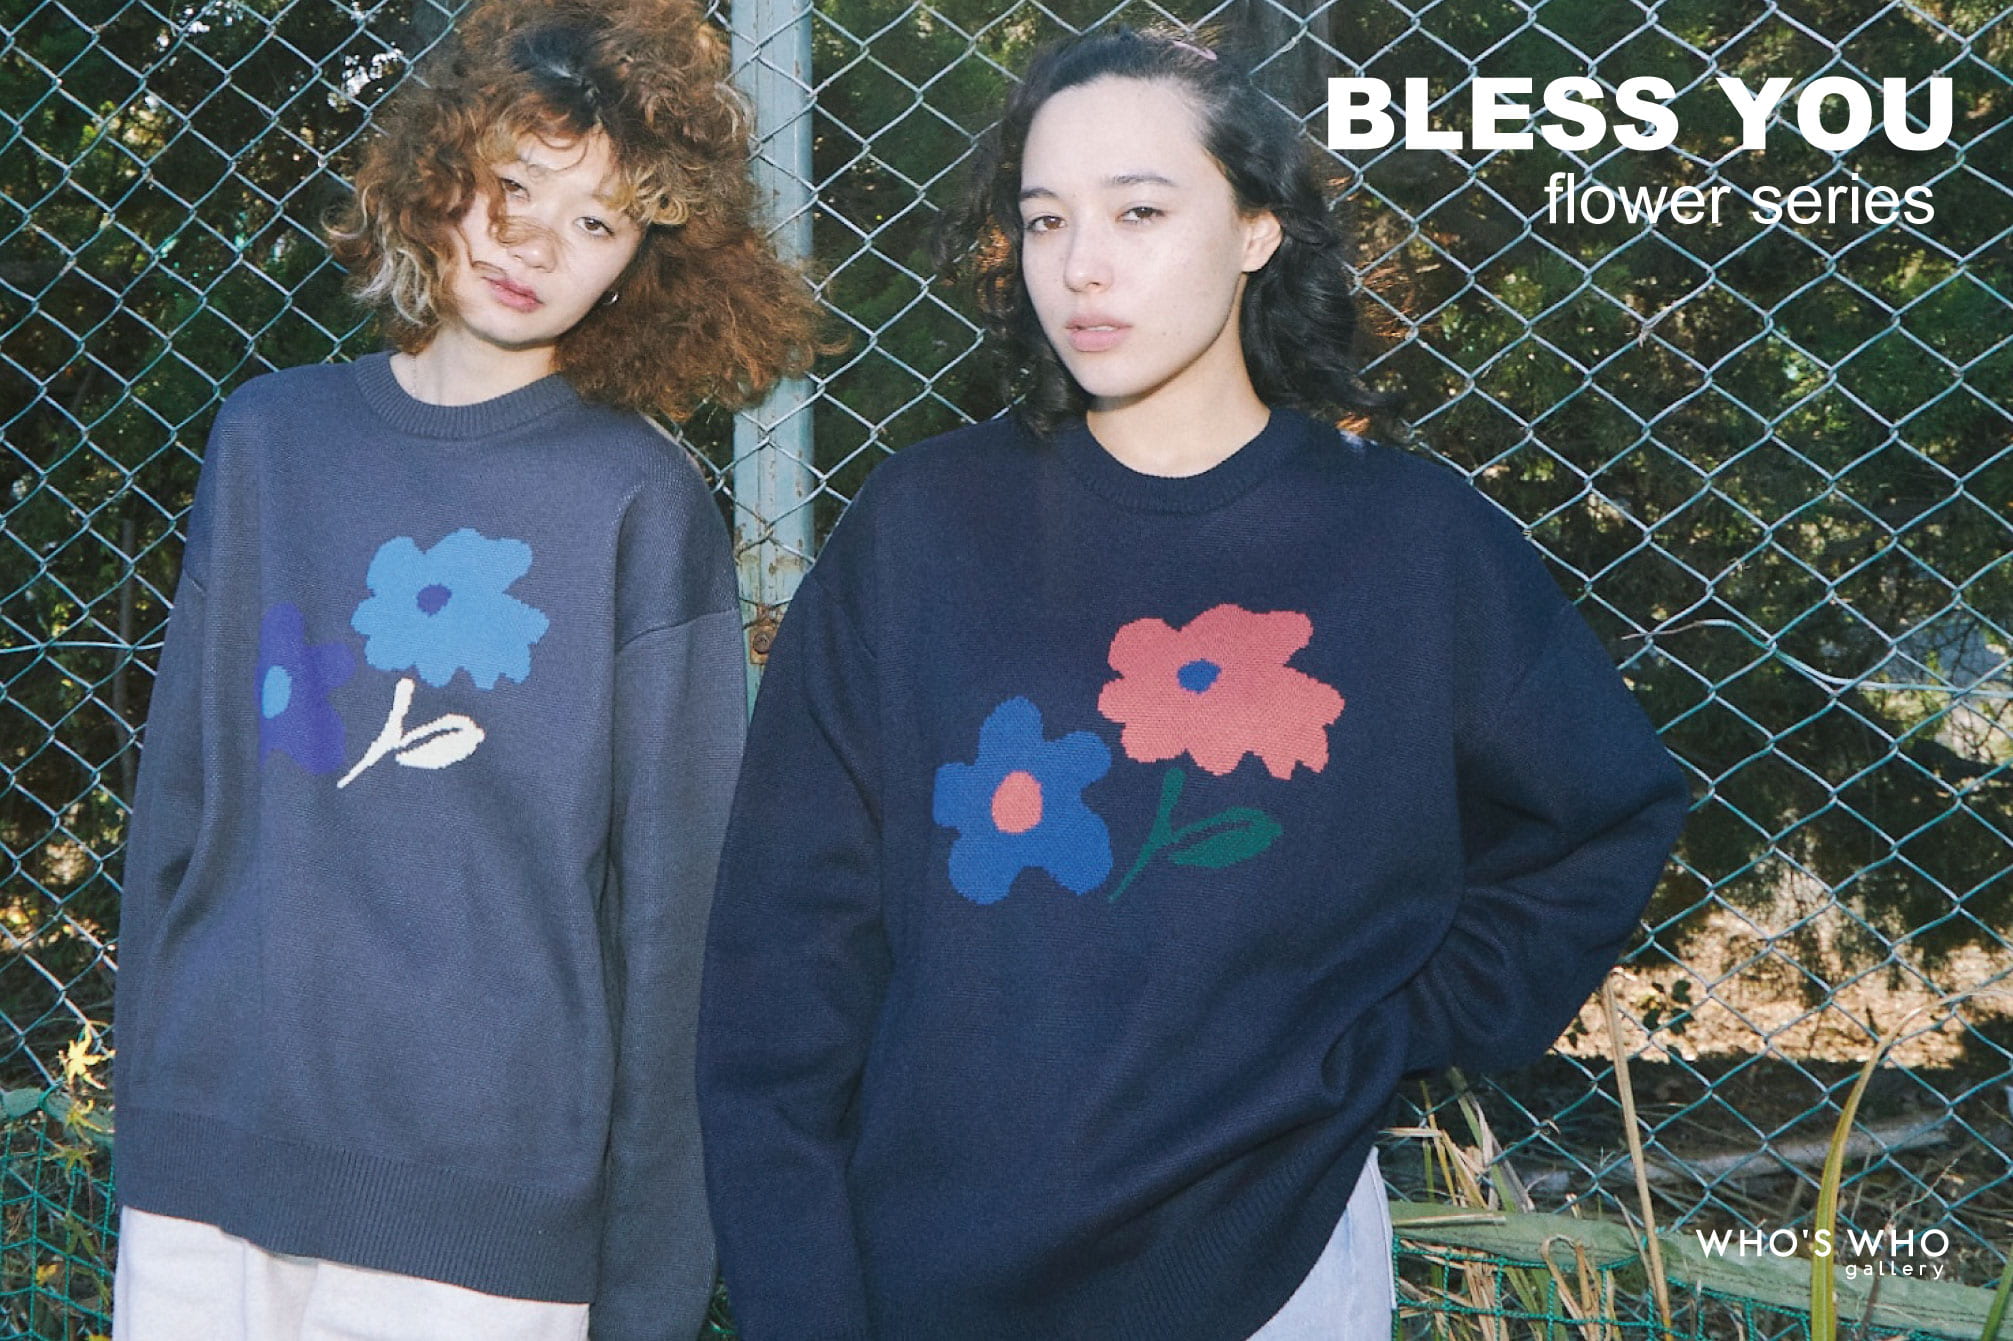 WHO’S WHO gallery 【BLESS YOU FLOWERS】